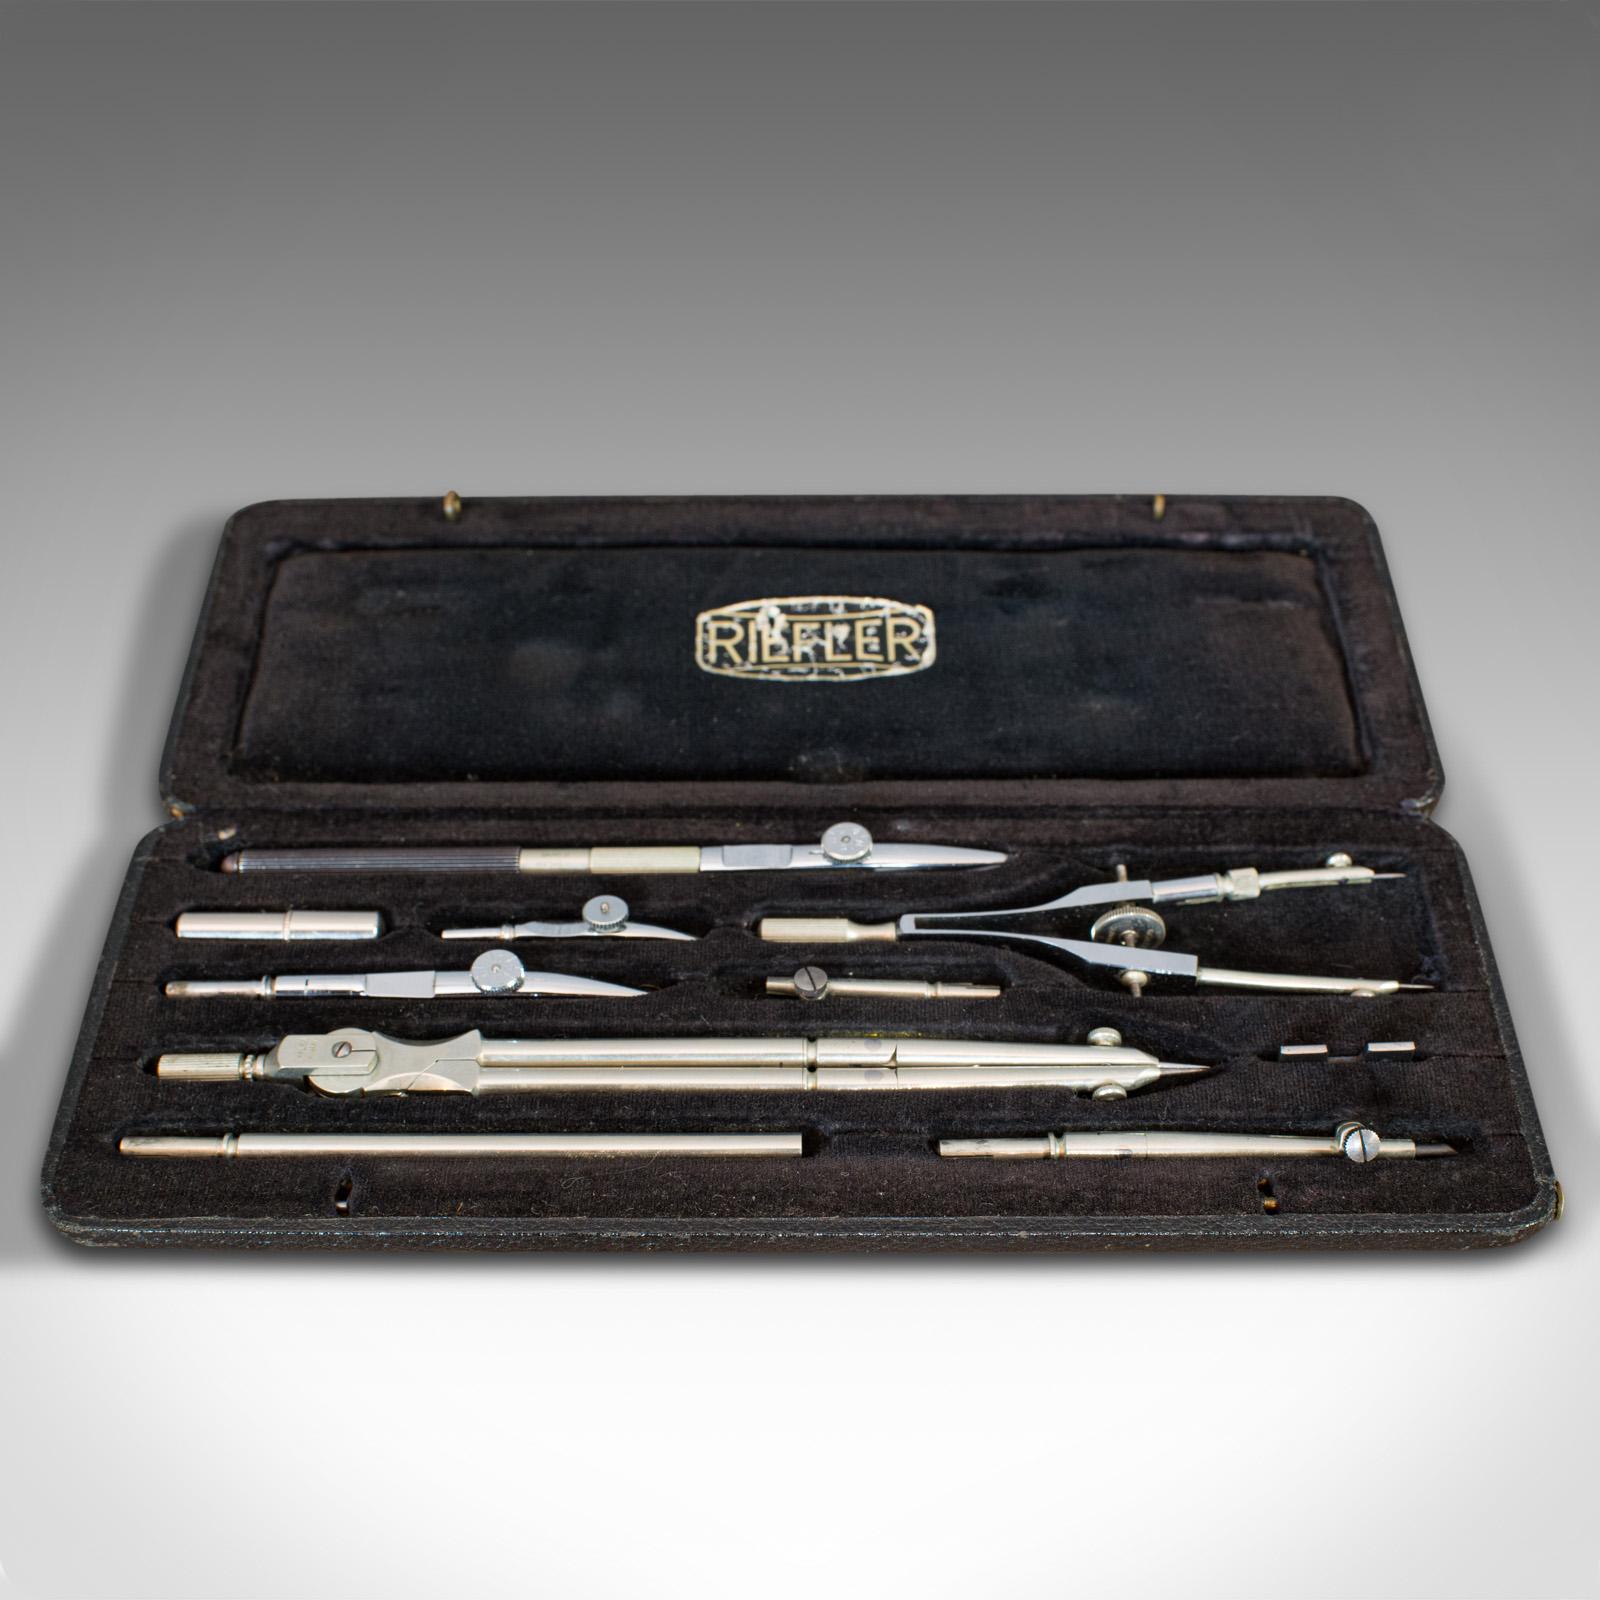 This is a vintage instrument set. A German, silver nickel 'A12' technical drawing set by Riefler of Munich, dating to the mid-20th century, circa 1950.

10 piece draughtsman's compendium
Displays a desirable aged patina
Silver nickel instruments